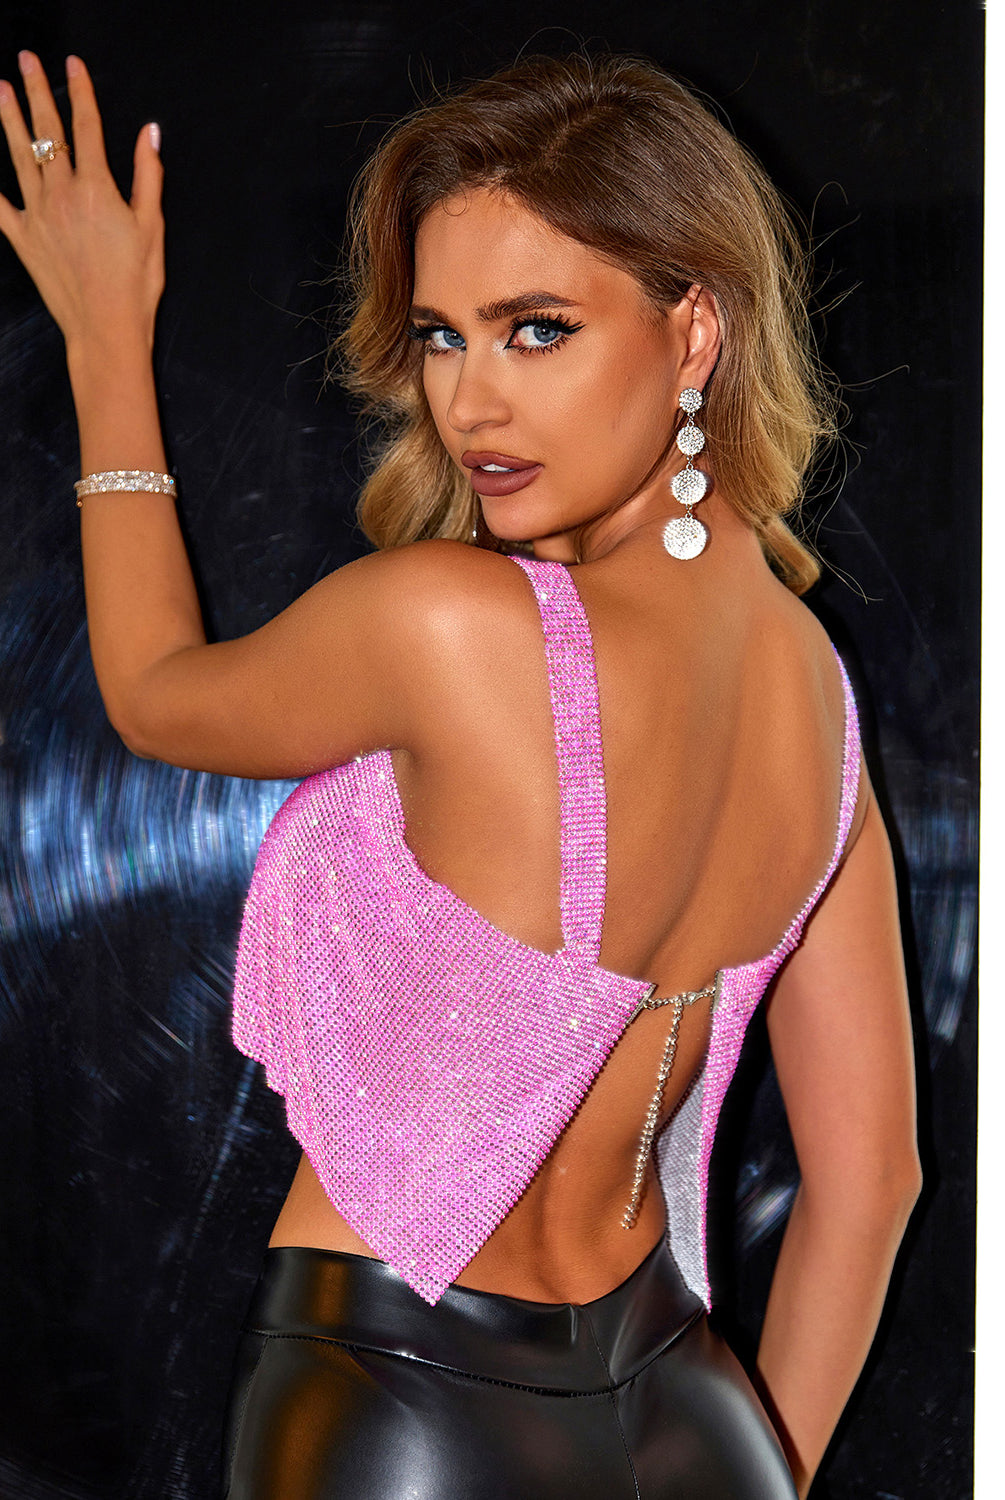 A woman modeling a shimmering pink sequin crop top with wide shoulder straps and a square neckline. The top is paired with high-waisted black faux leather pants, accentuating a trendy and sophisticated look. She complements the outfit with sparkling teardrop earrings and a matching silver bracelet, creating a cohesive and glamorous ensemble. Her hair is styled in elegant waves, and her makeup features a bold eye and a soft, matte lip color, highlighting her confident and stylish appearance.